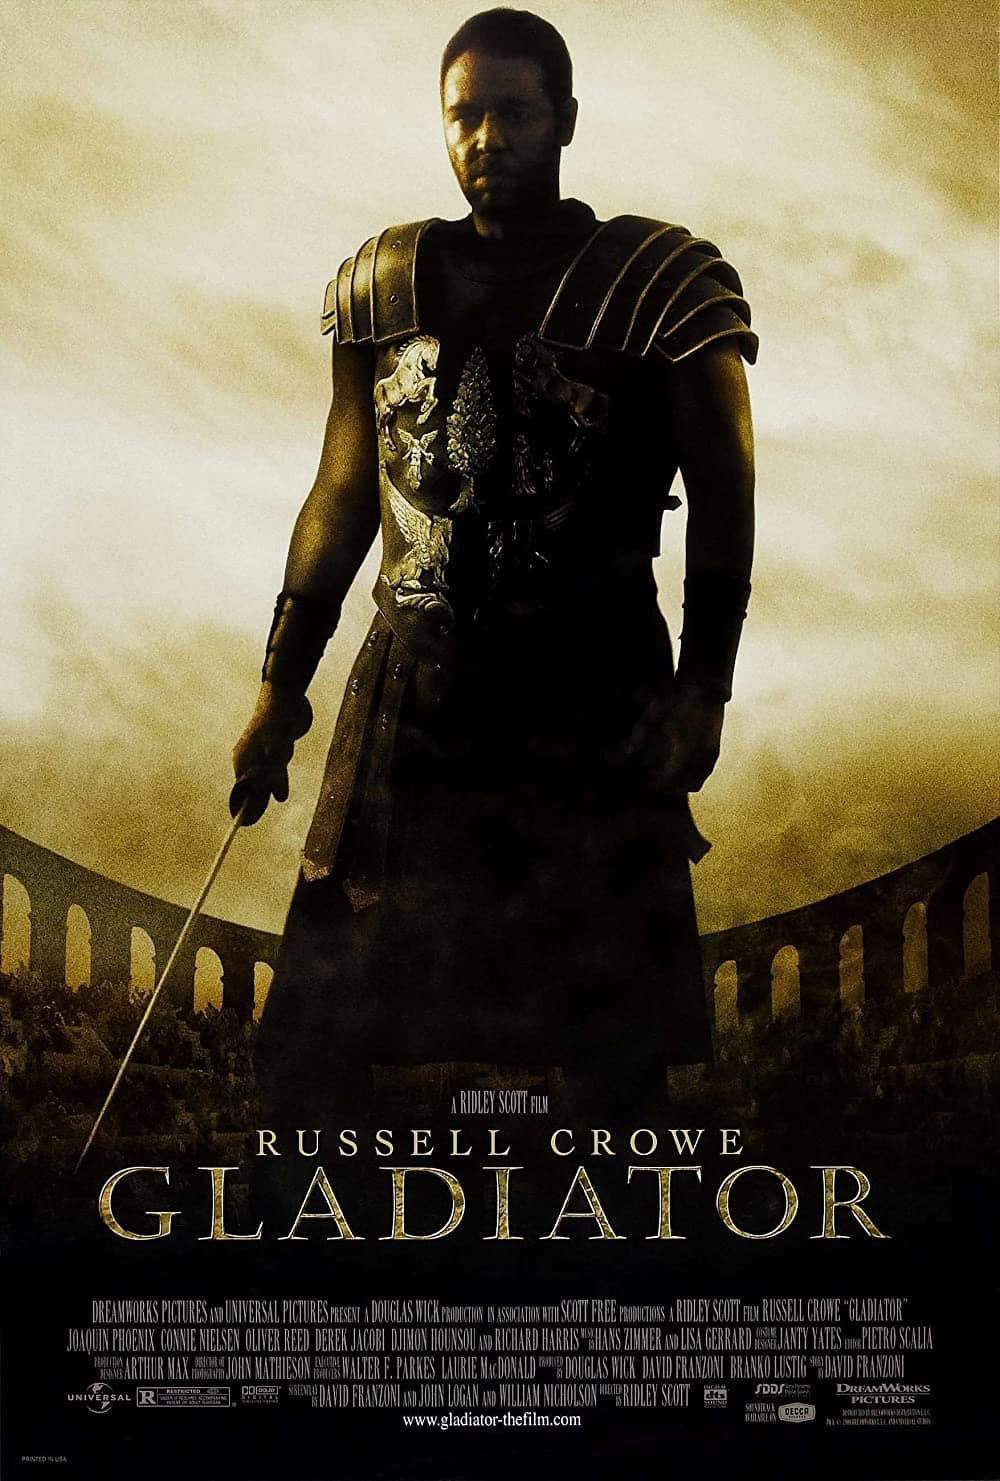 Best Fighting Movies You Can't Miss Gladiator (2000)